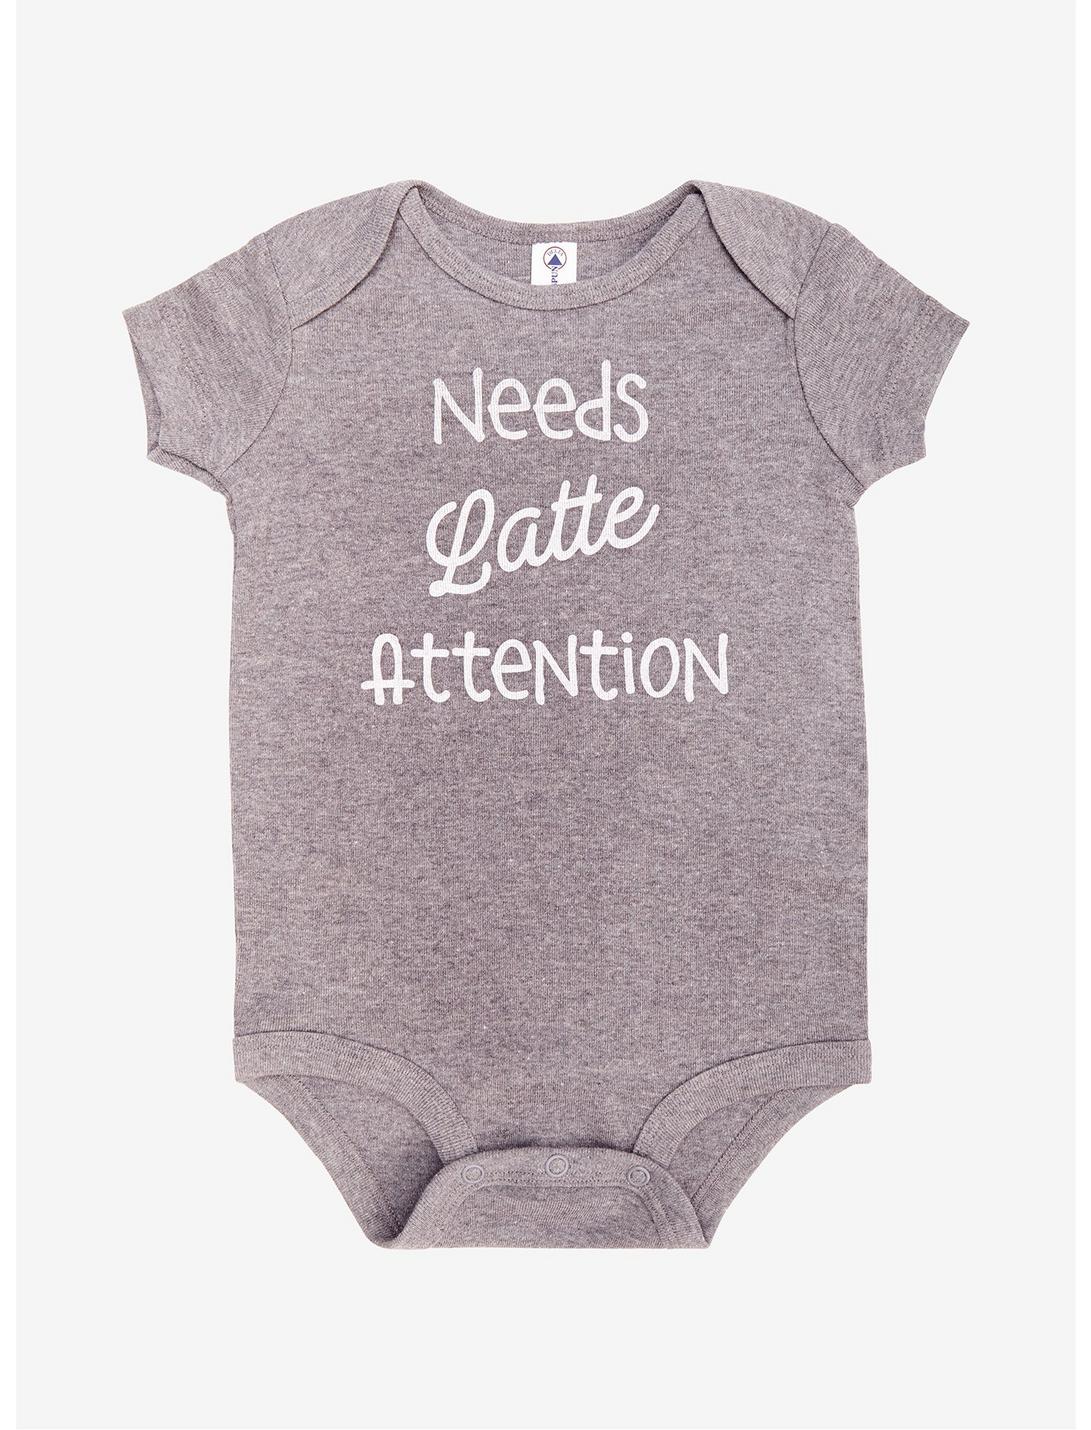 Needs Latte Attention Infant Bodysuit - BoxLunch Exclusive, GREY, hi-res